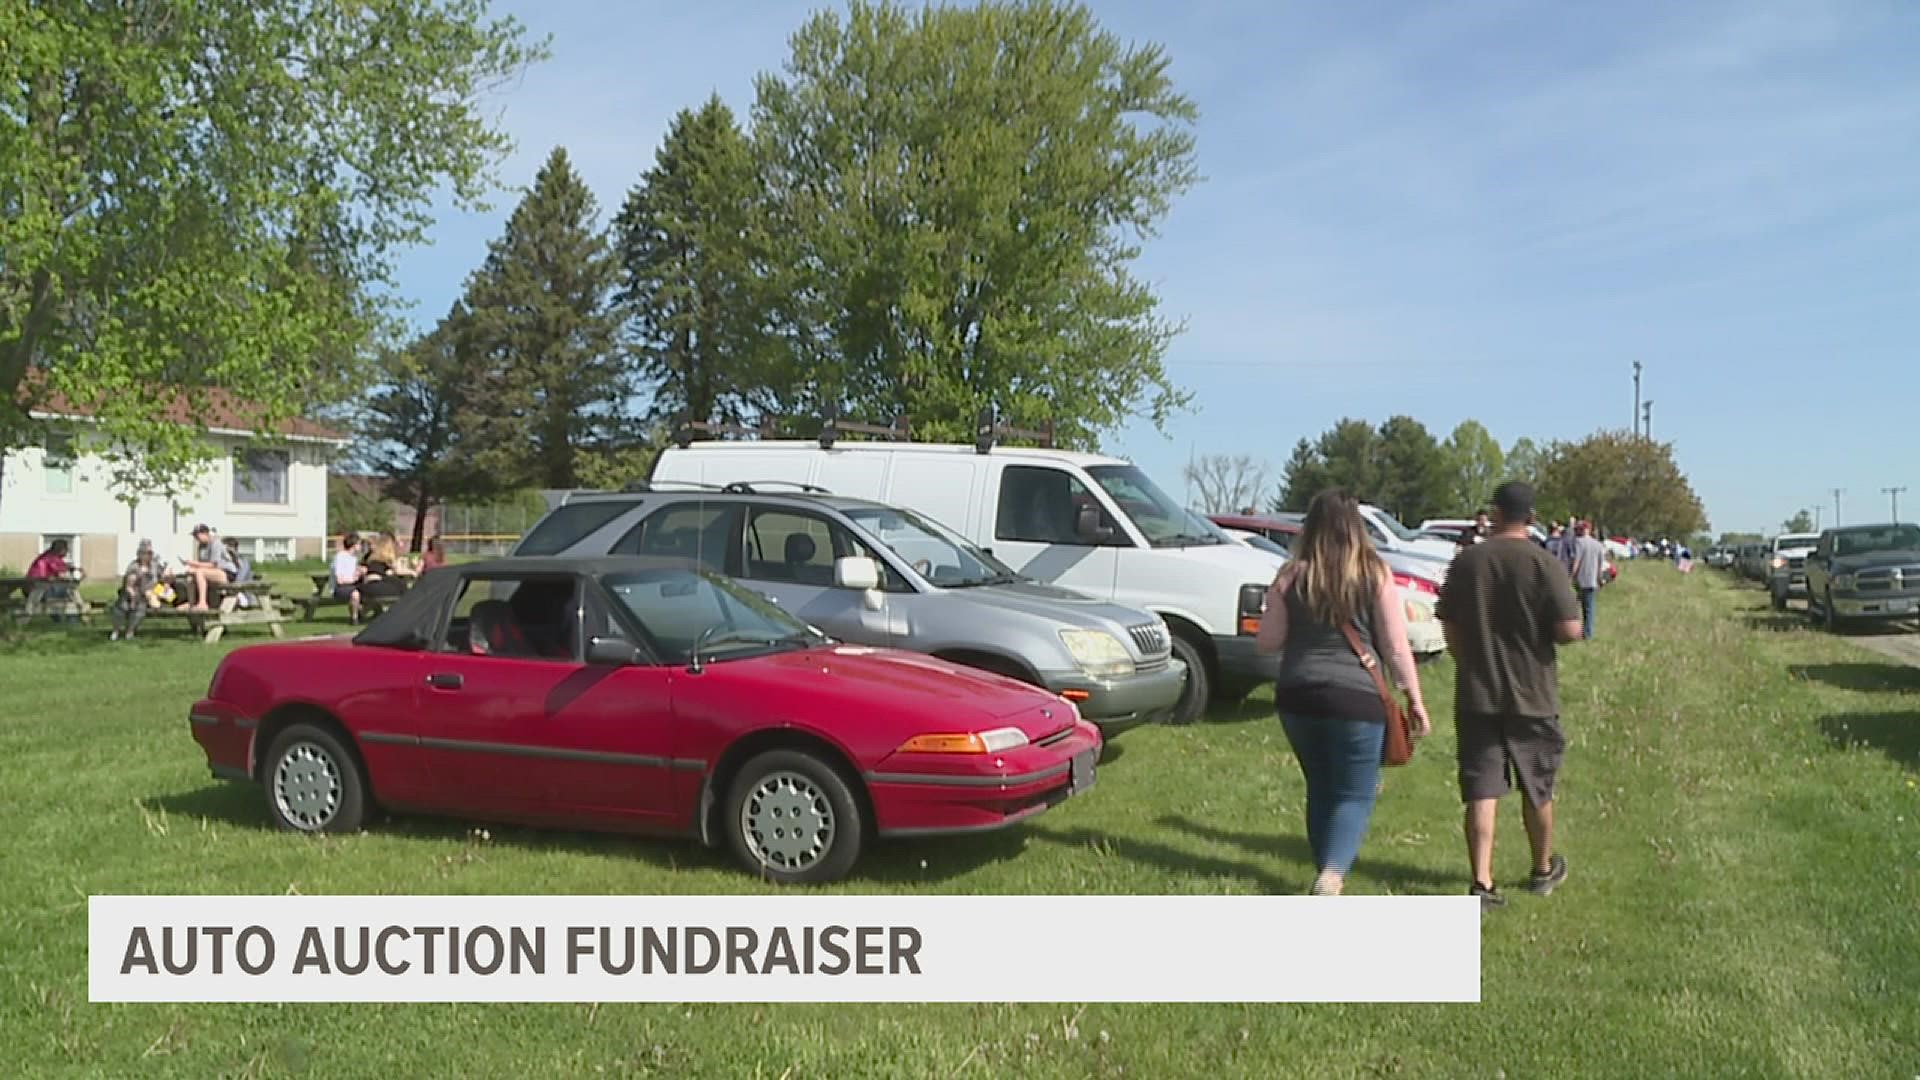 Arrowhead Ranch's Auto Auction returned Saturday with 82 cars available for bidding.